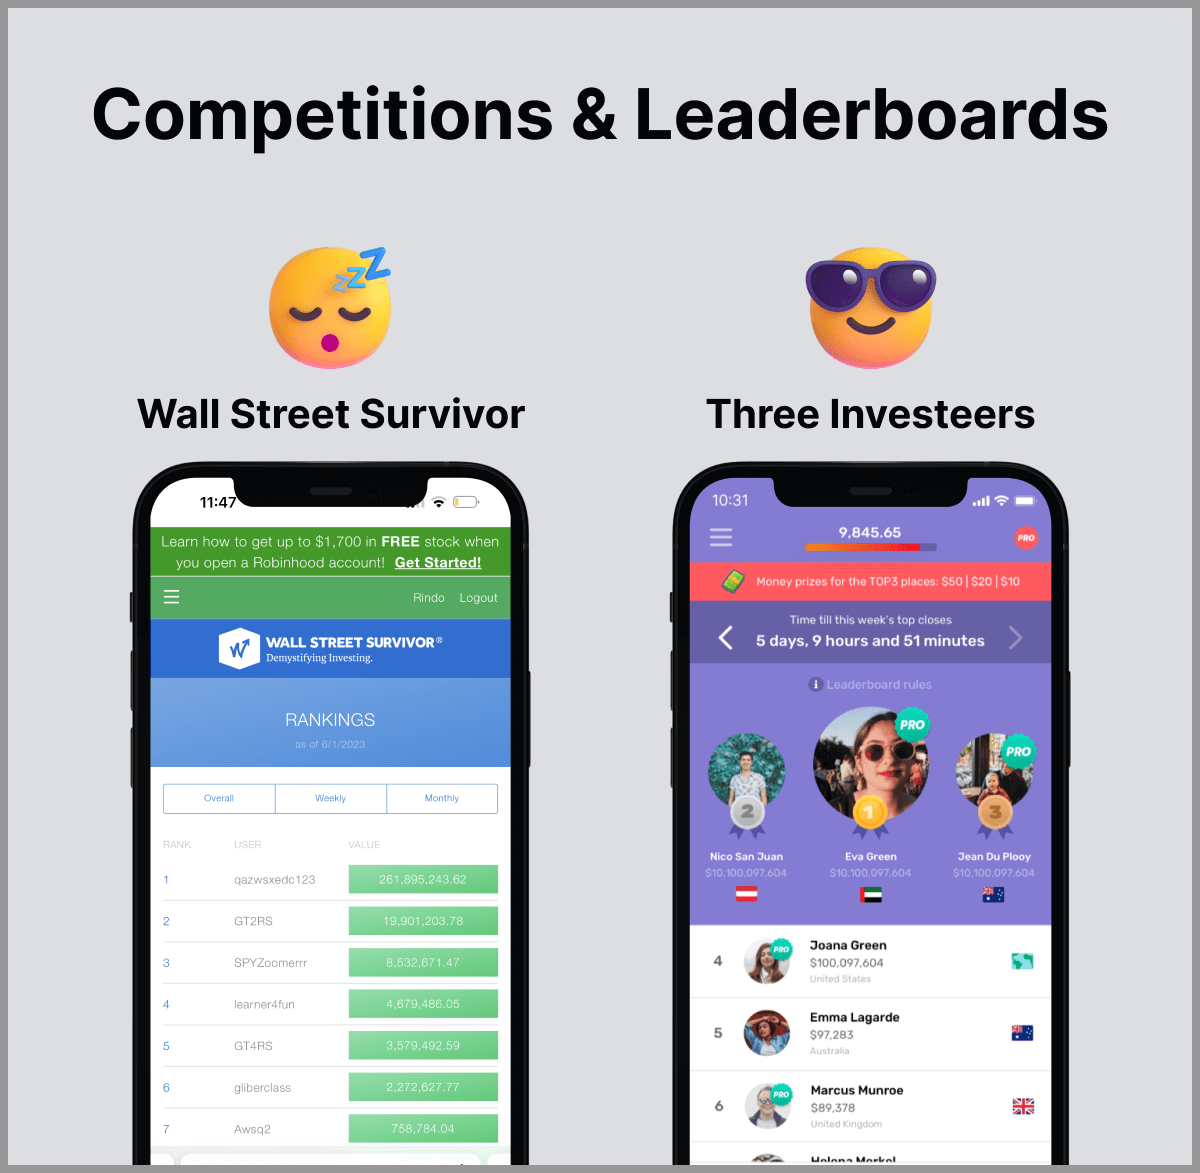 Wall Street Survivor leaderboard Vs Three investeers stock market game leaderboard with real money prizes